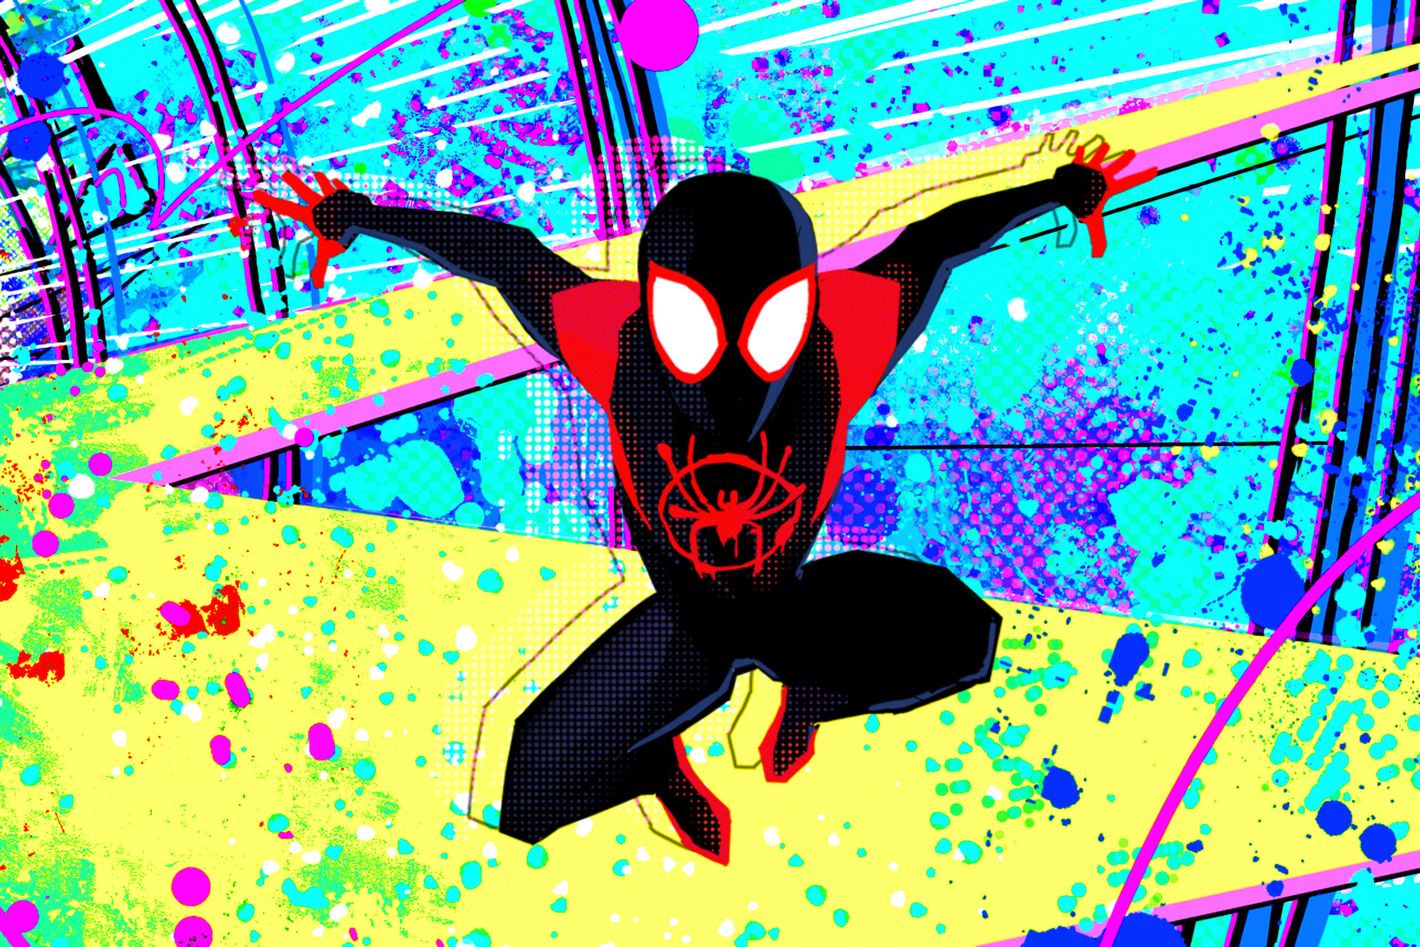 How Spider Man Into The Spider Verse Changed Animation